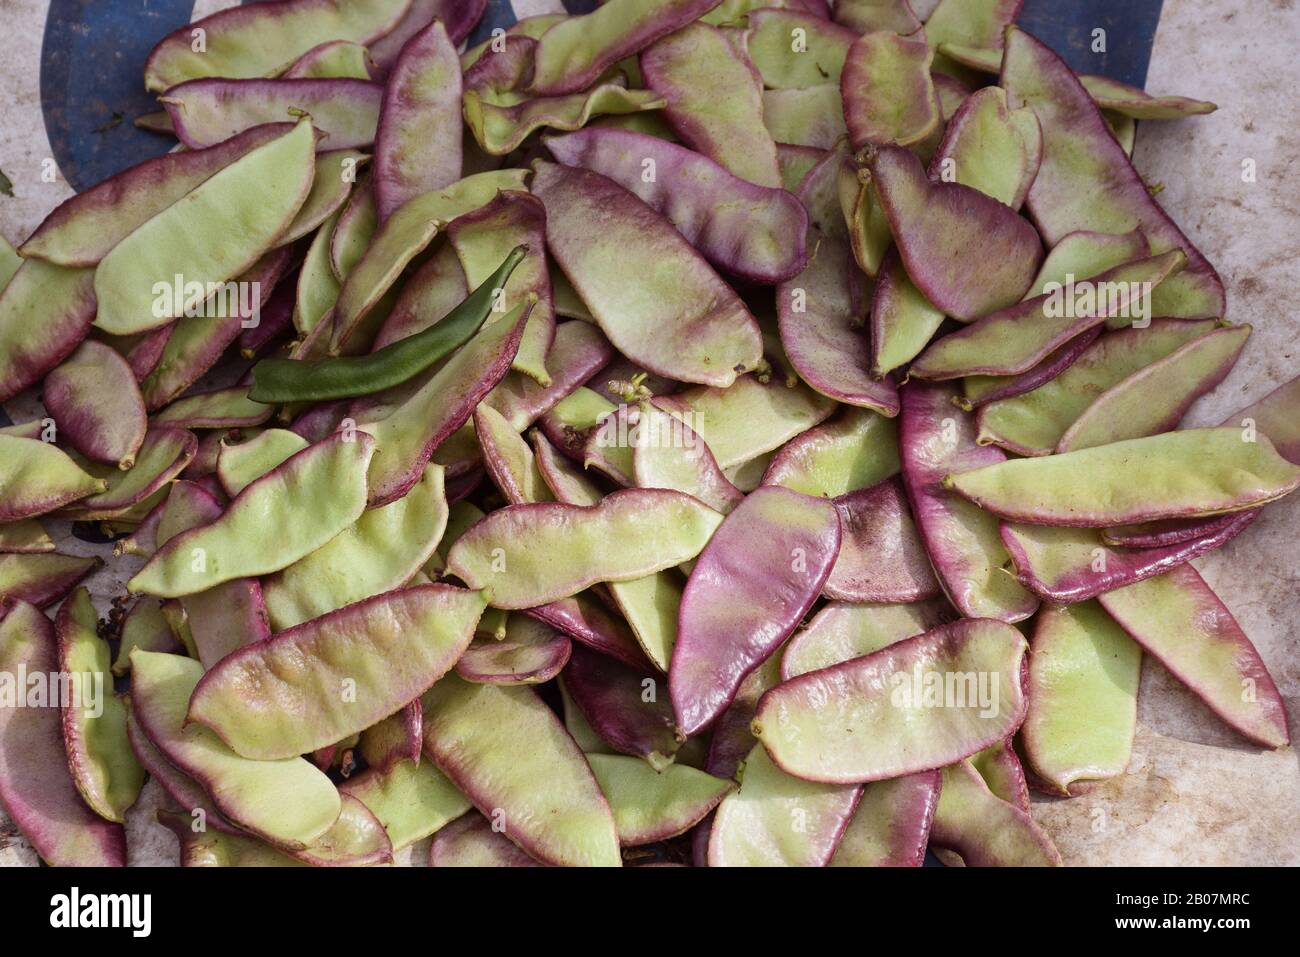 Indian vegetable Sim or Shim for sale in an Indian market Stock Photo